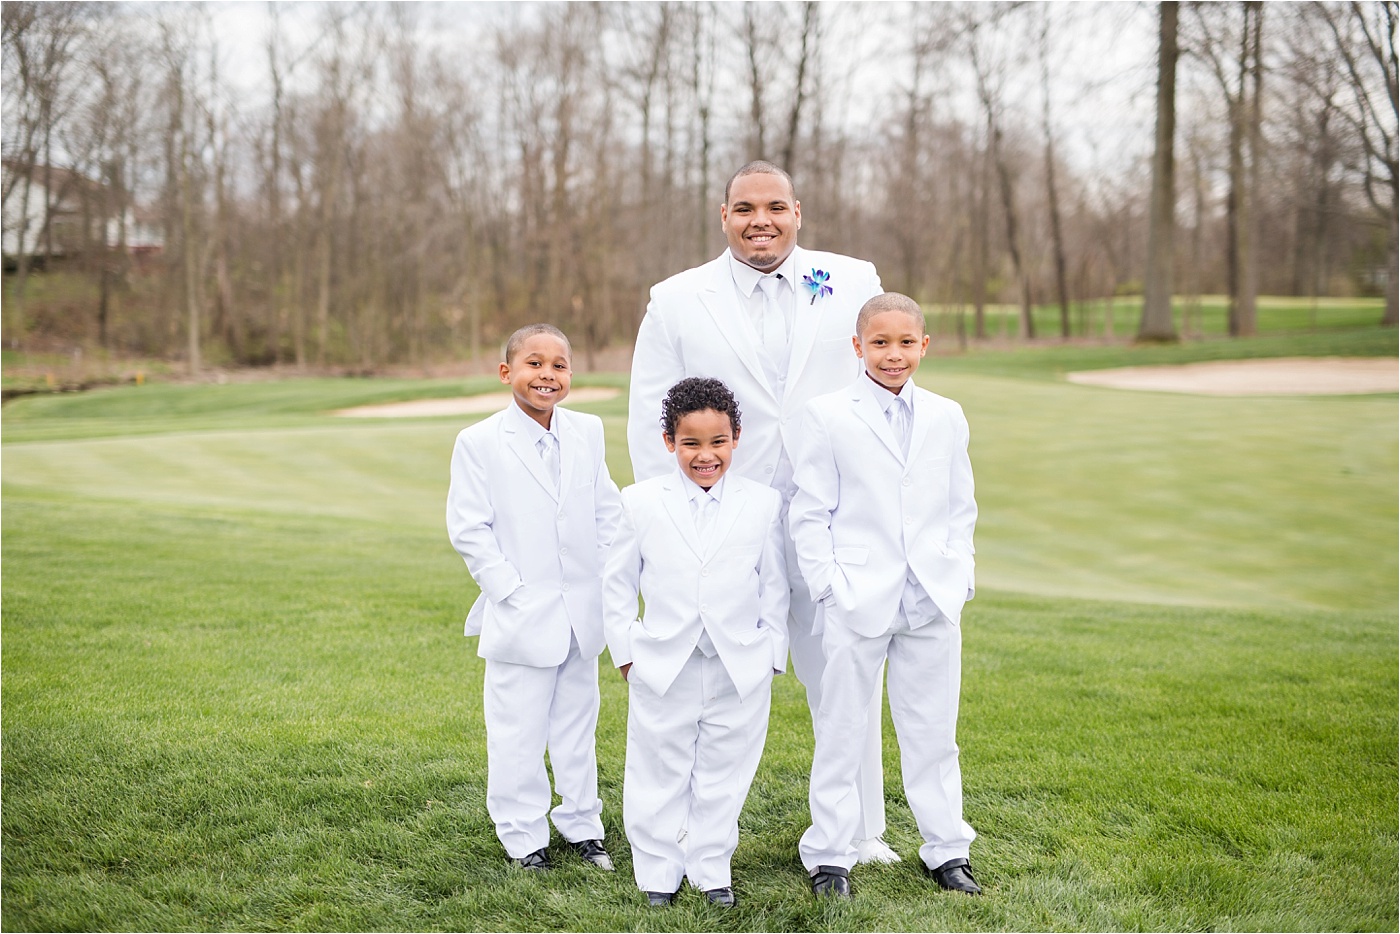 Spring Teal Wedding at Scioto Reserve Country Club_0038